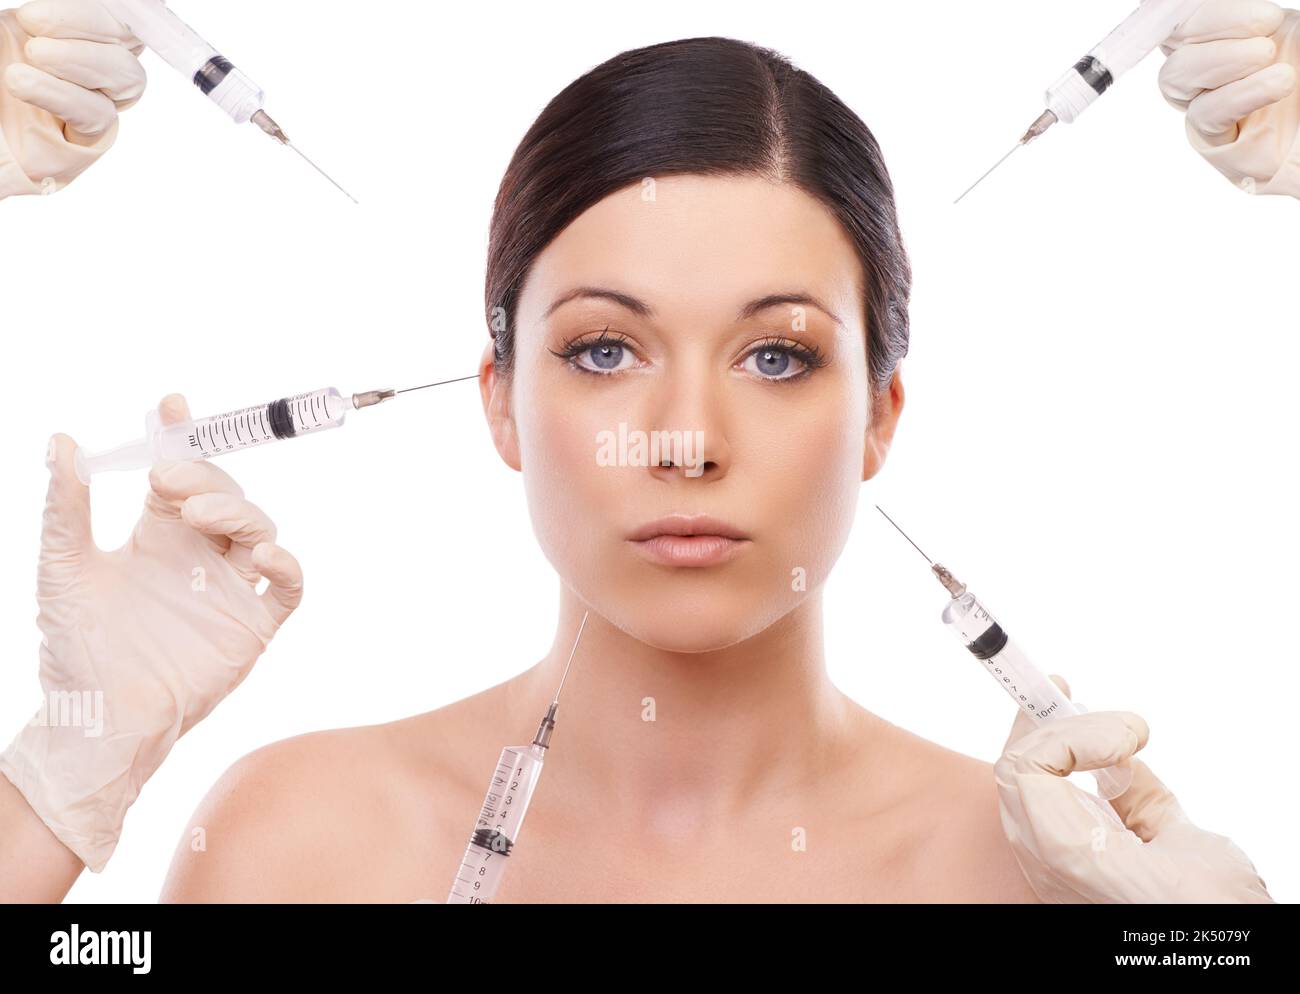 Beauty through botox. A young woman looking at the camera with five injection needle pointed at her face. Stock Photo